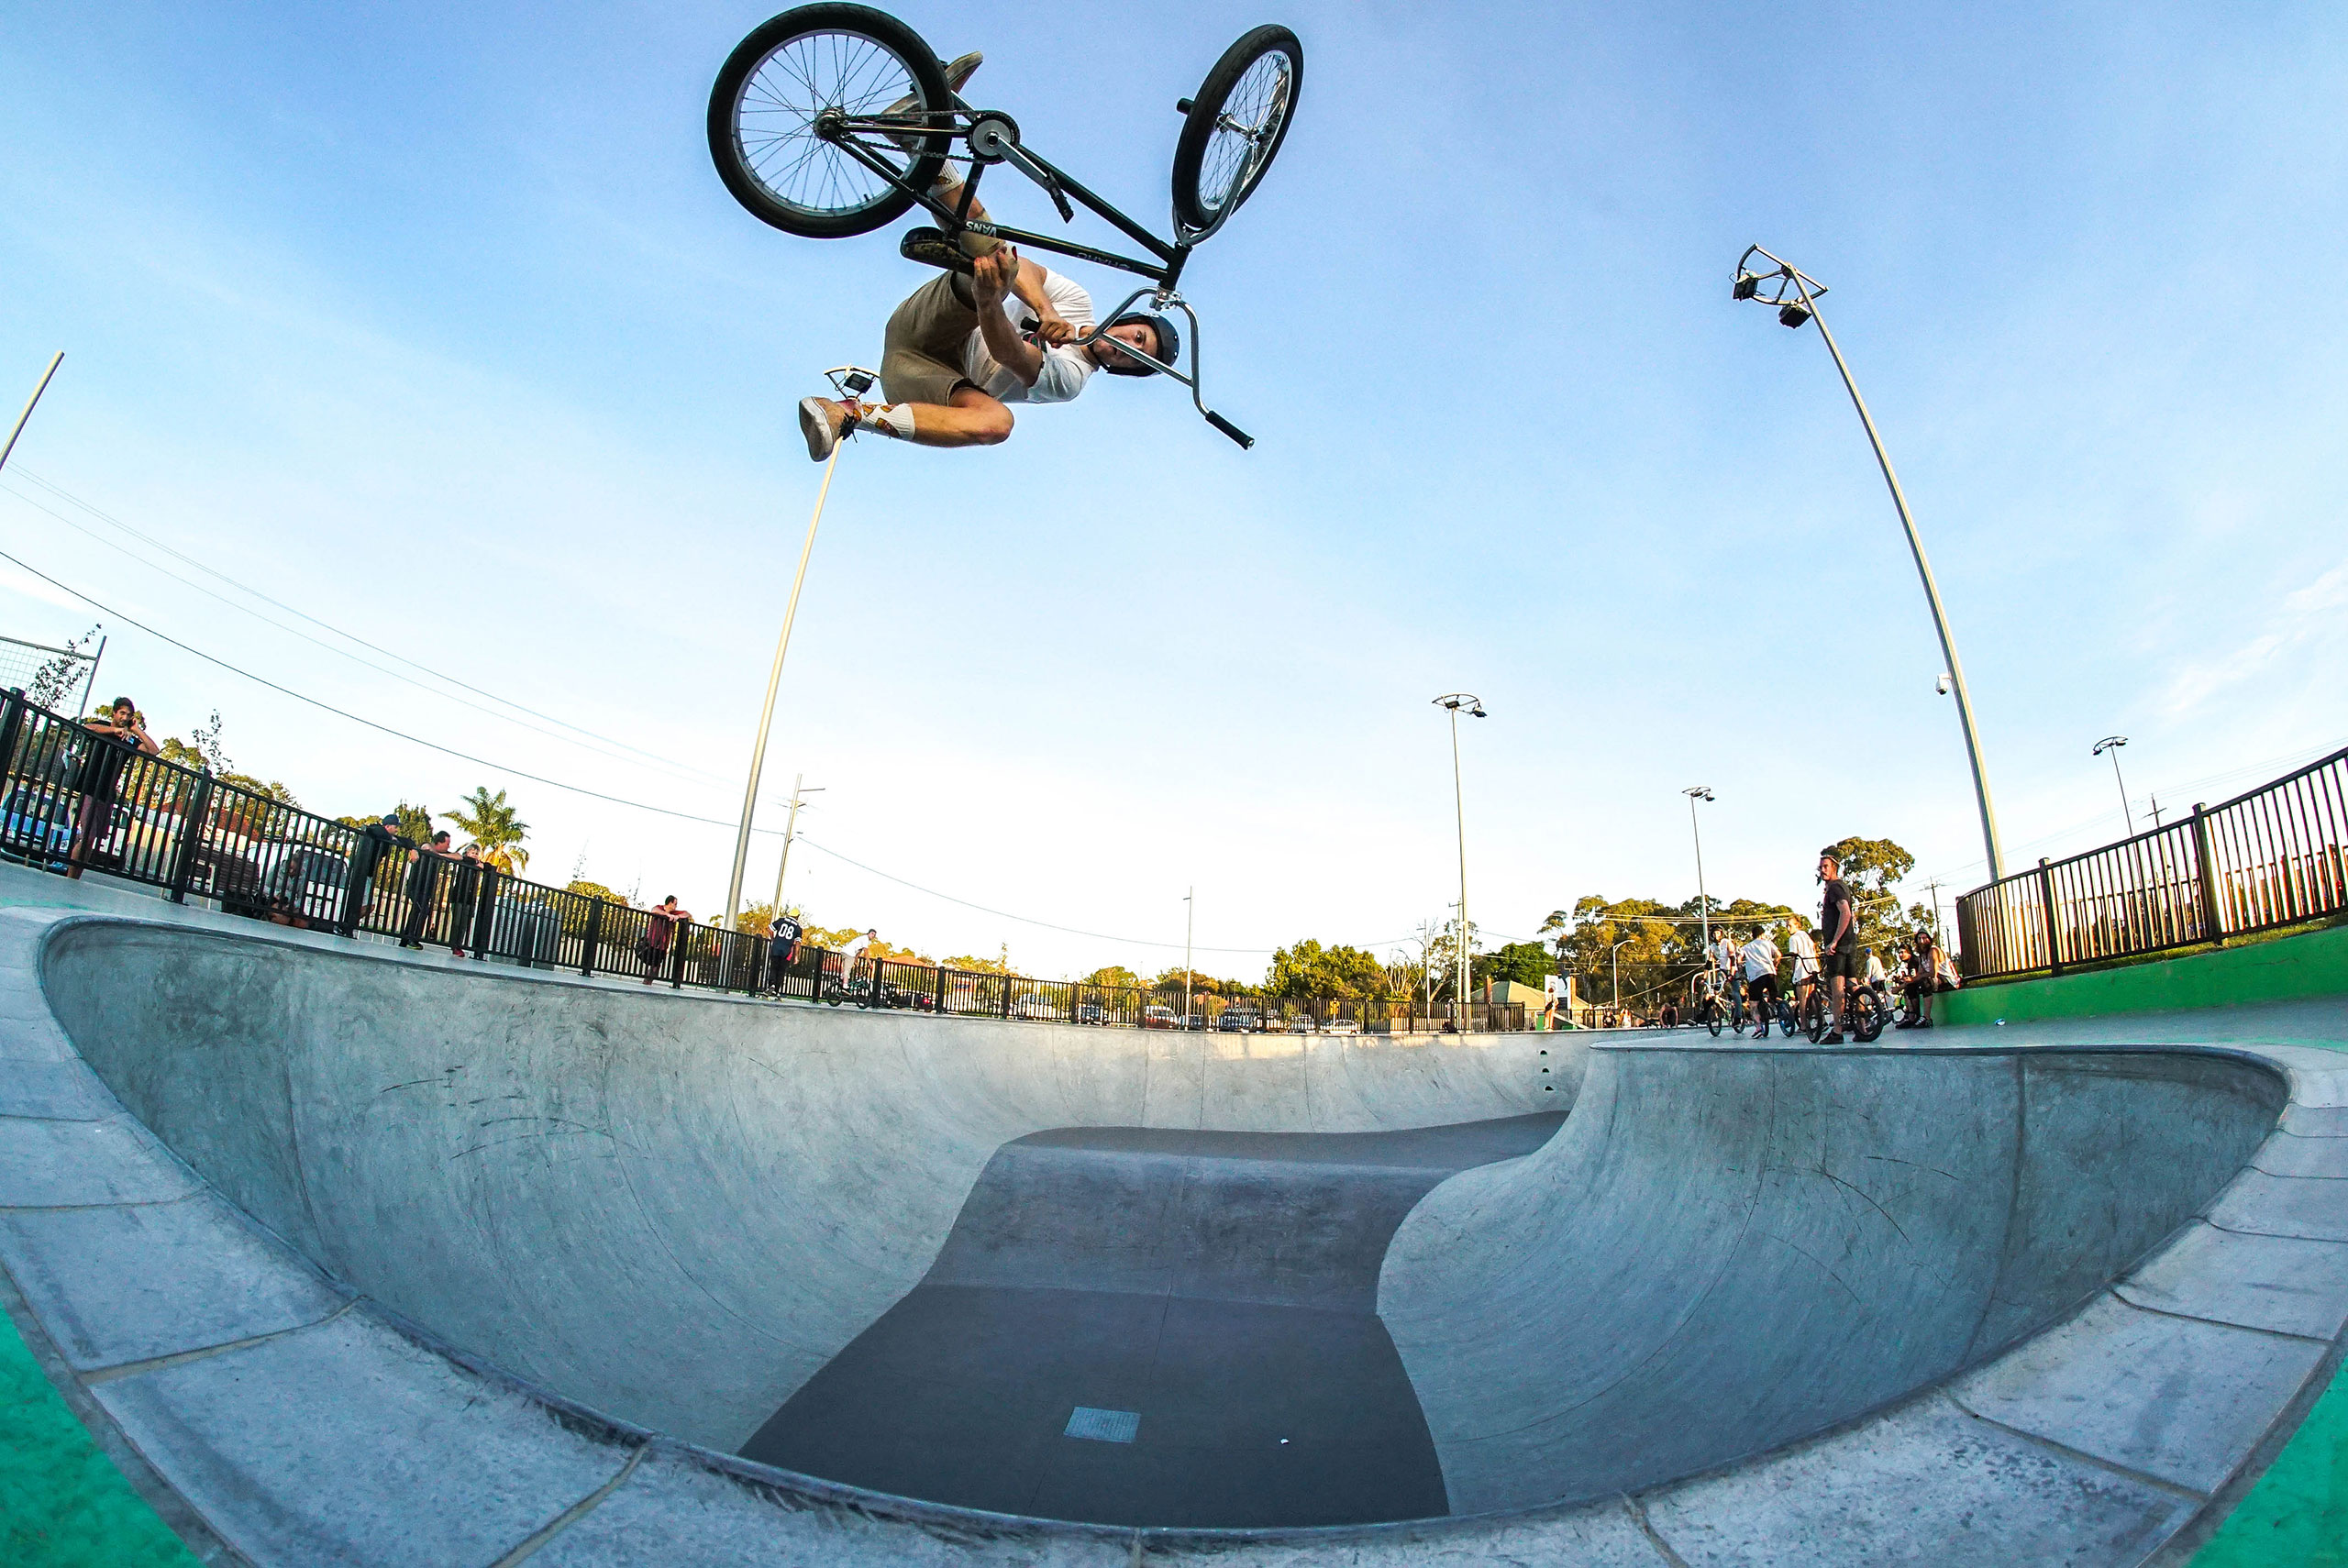 Jason Watts visited Melbourne recently and had literally every person watching him ride the bowl at Noble Park.